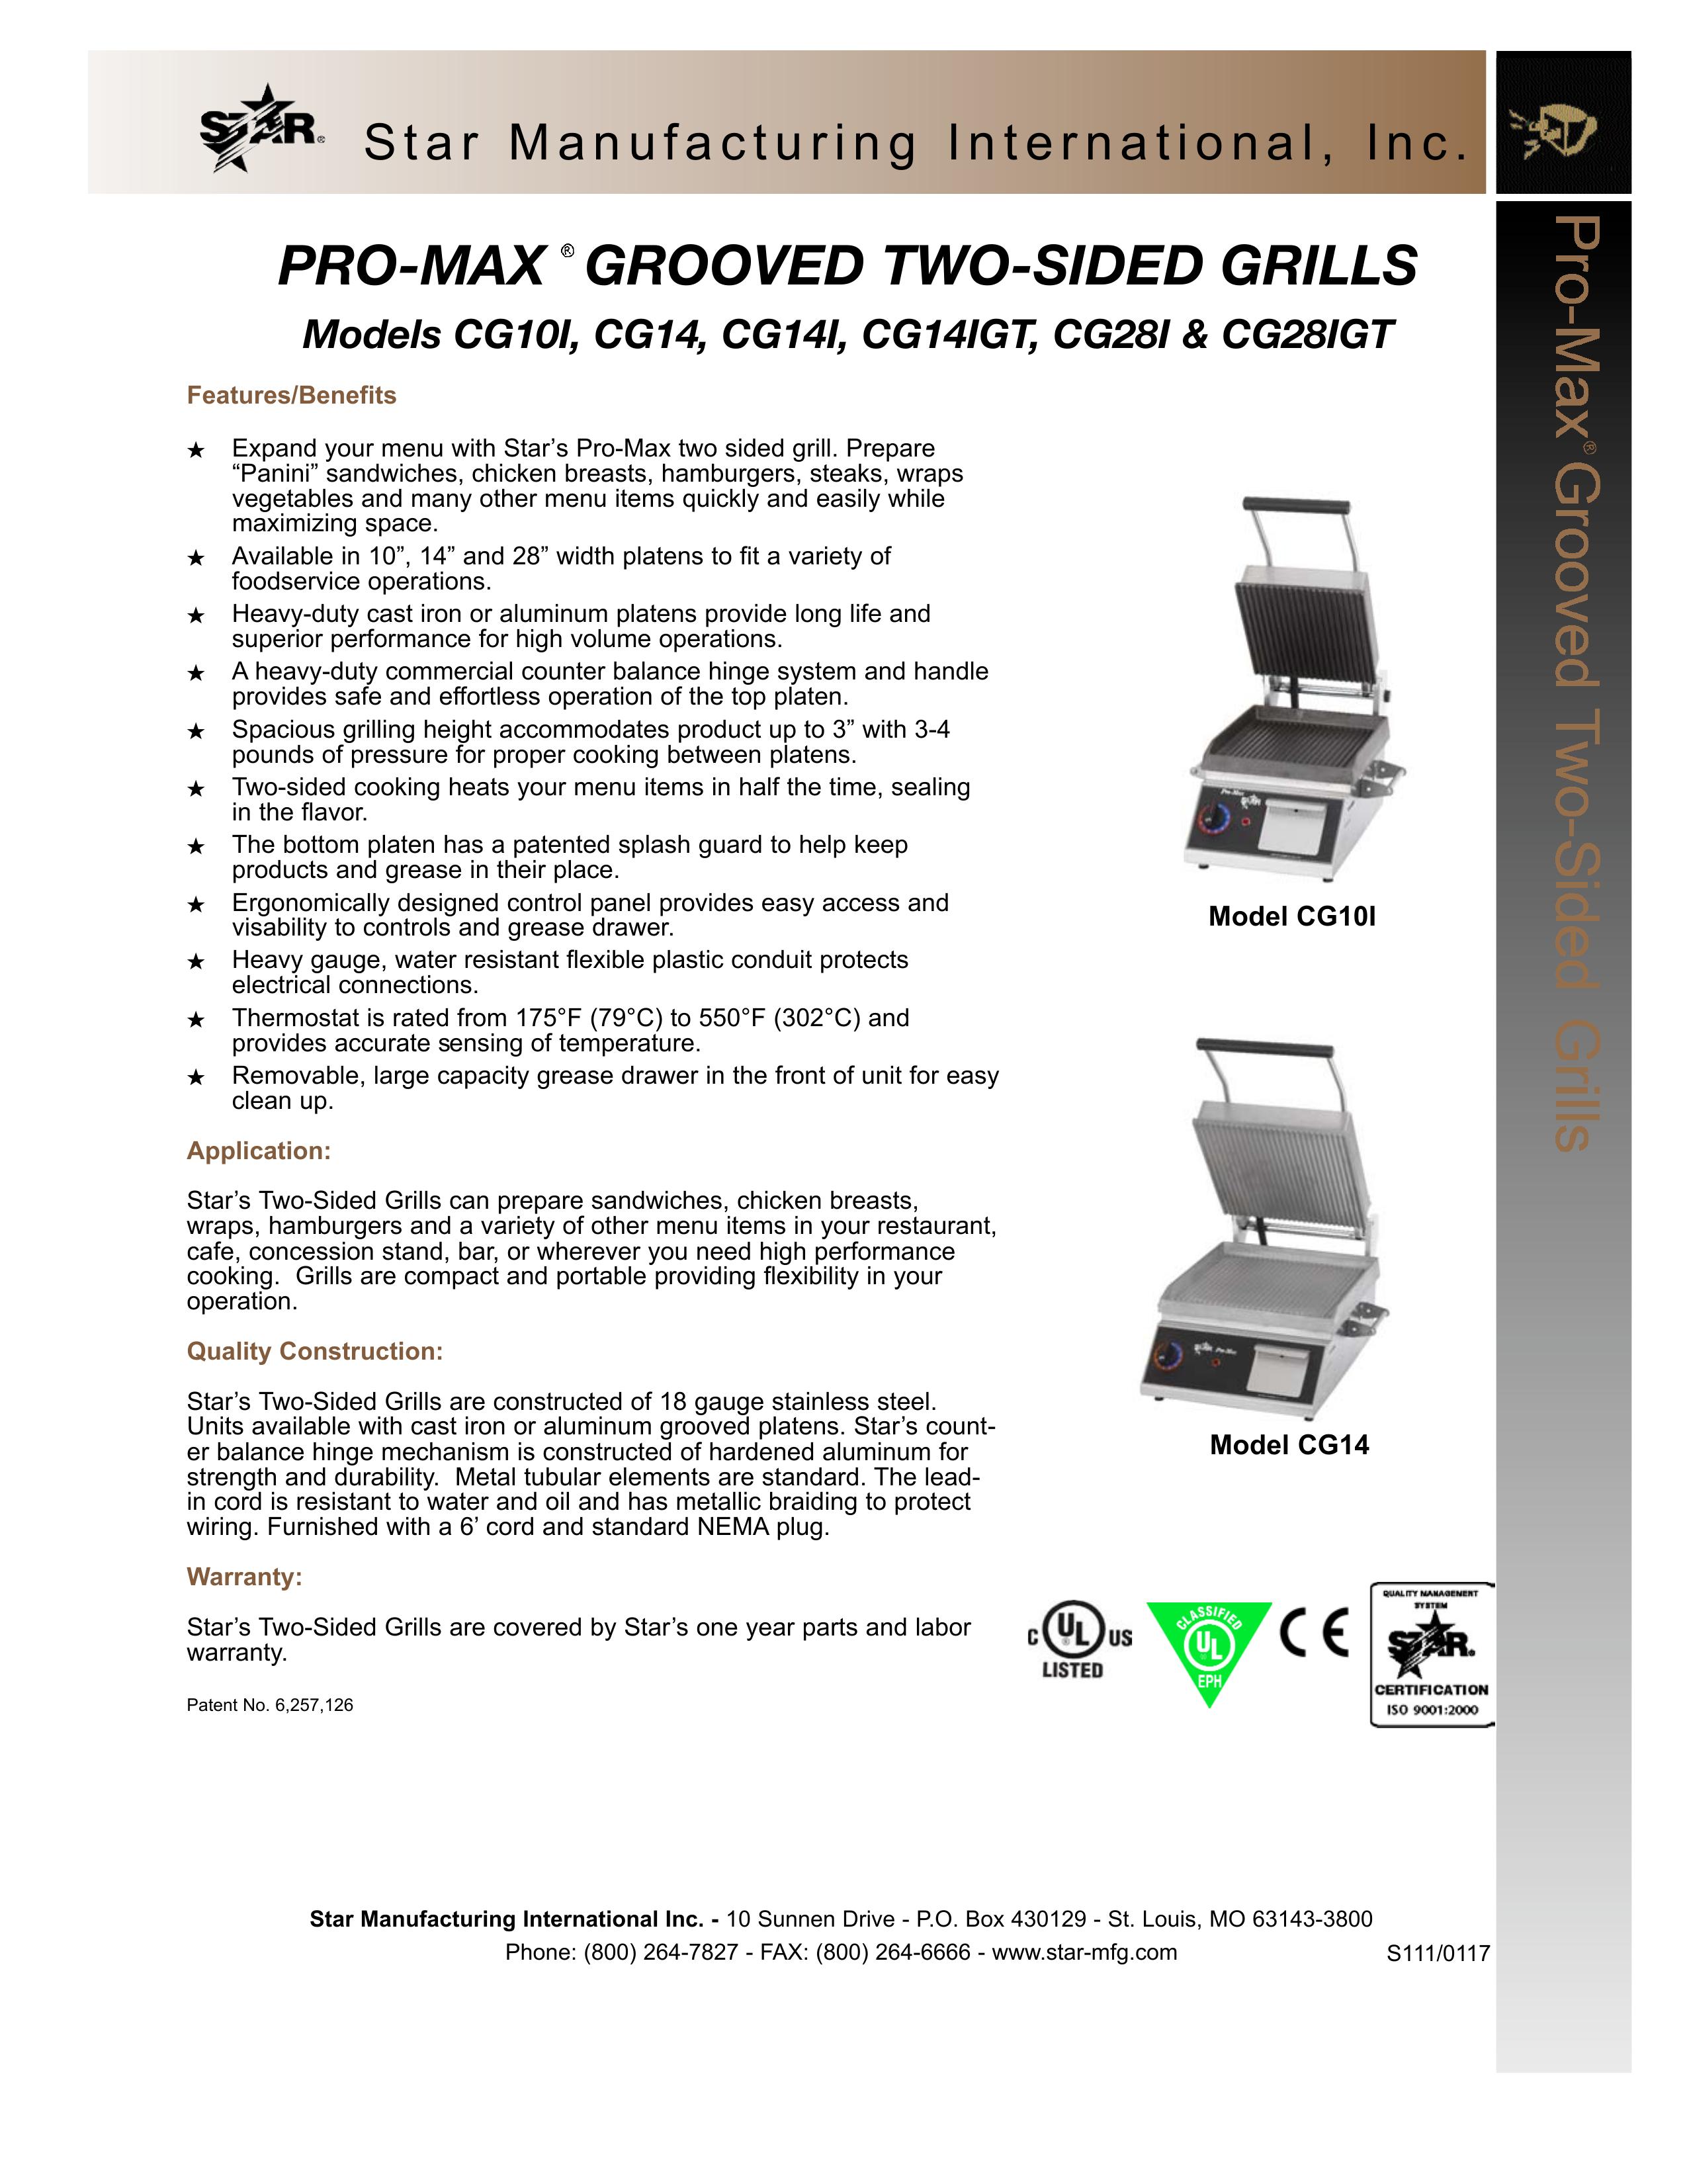 Star Manufacturing CG14 Electric Grill User Manual